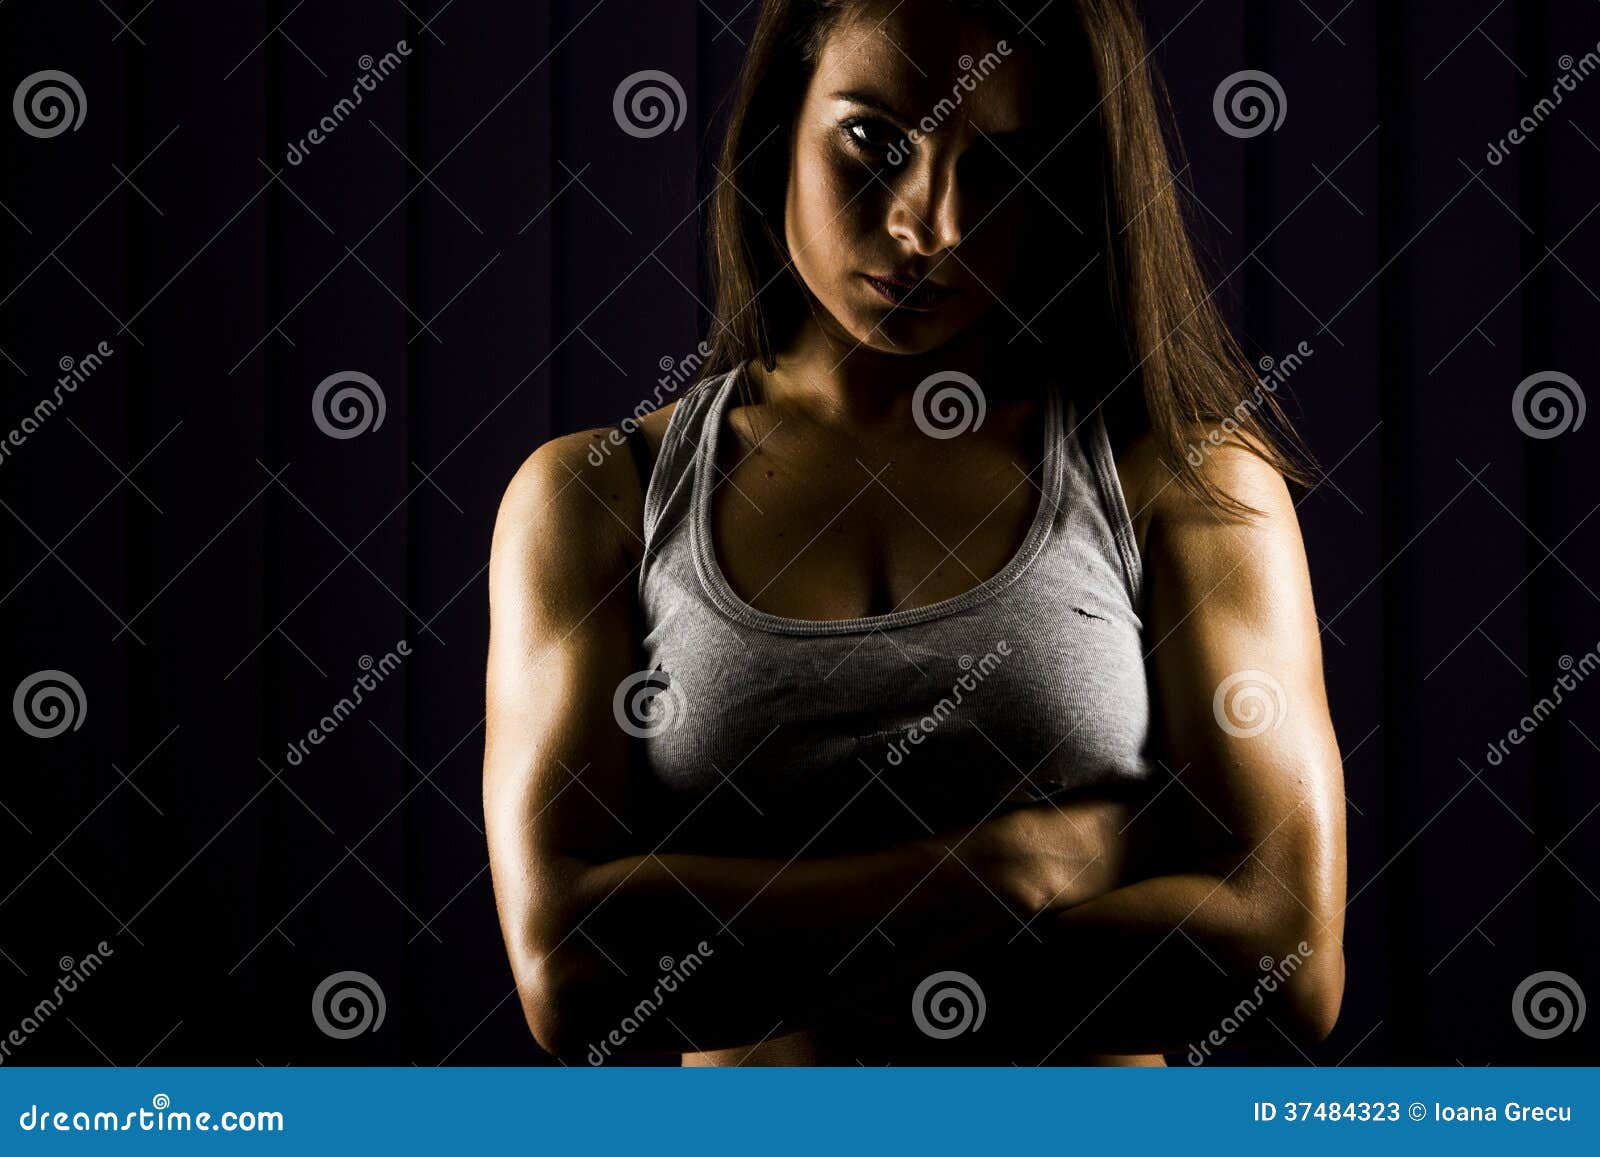 strong, very fit young woman